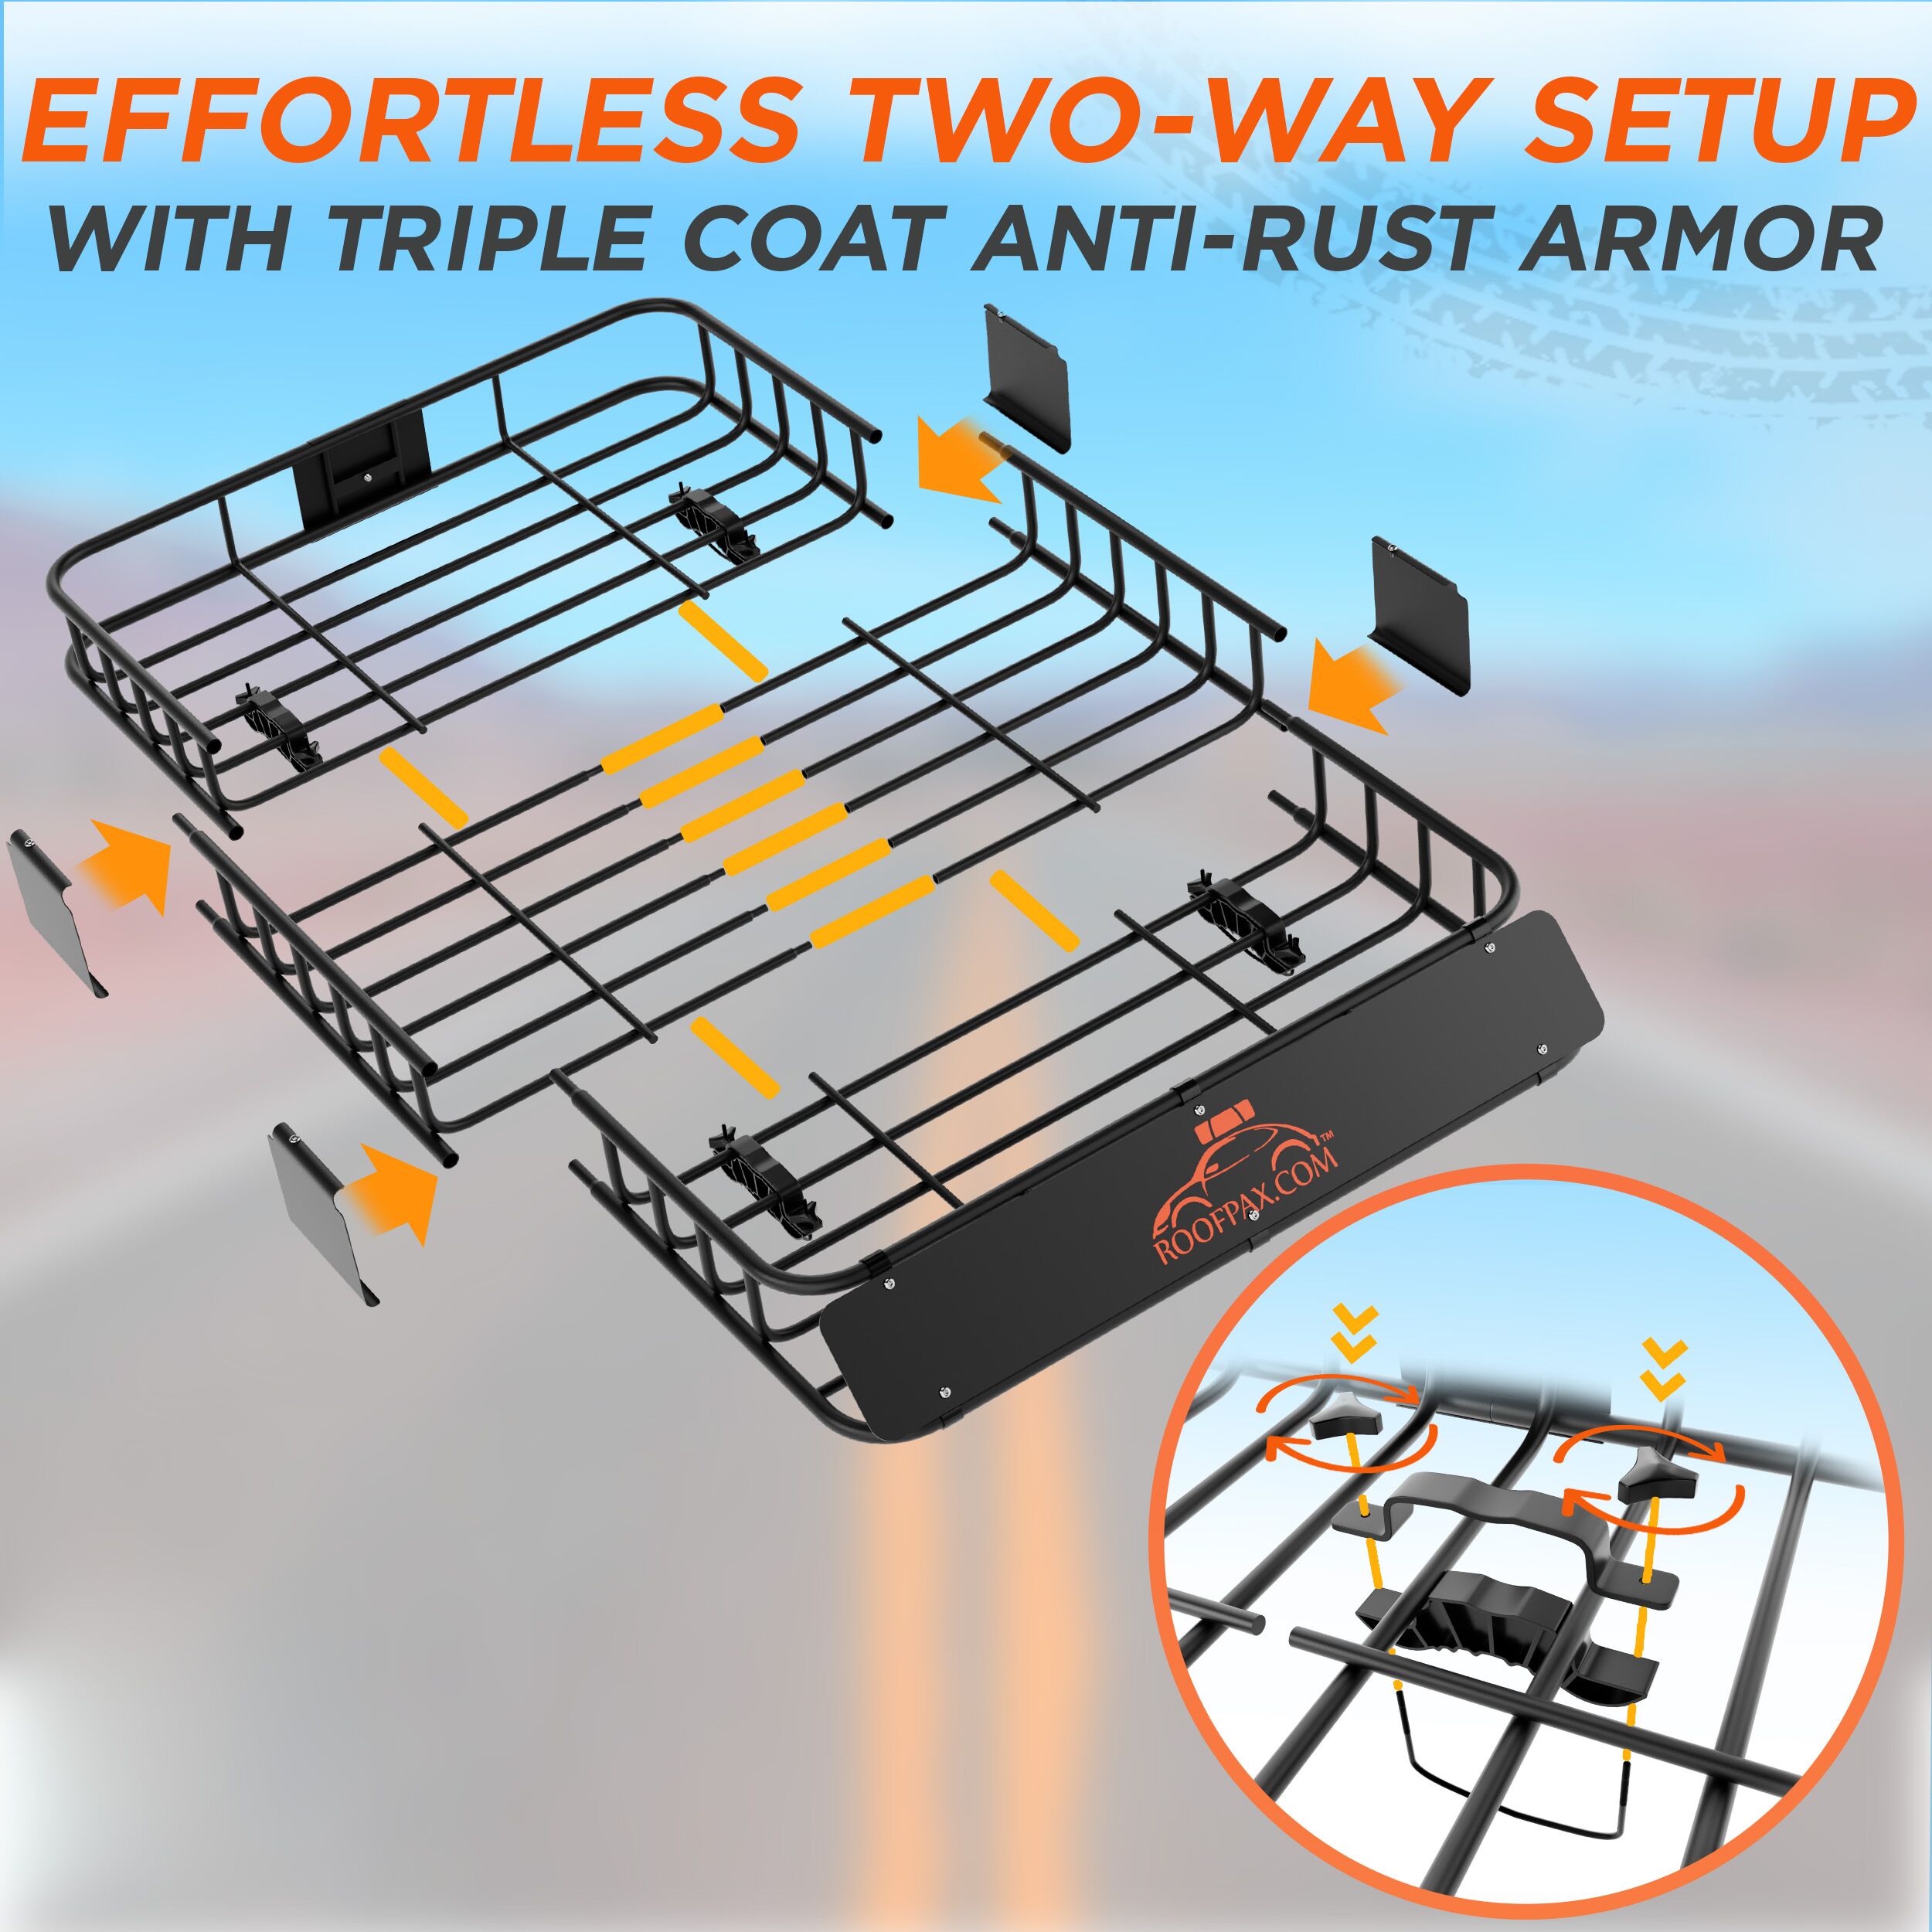 Car Roof Rack Basket - RoofPax: Travel More - Worry Less!